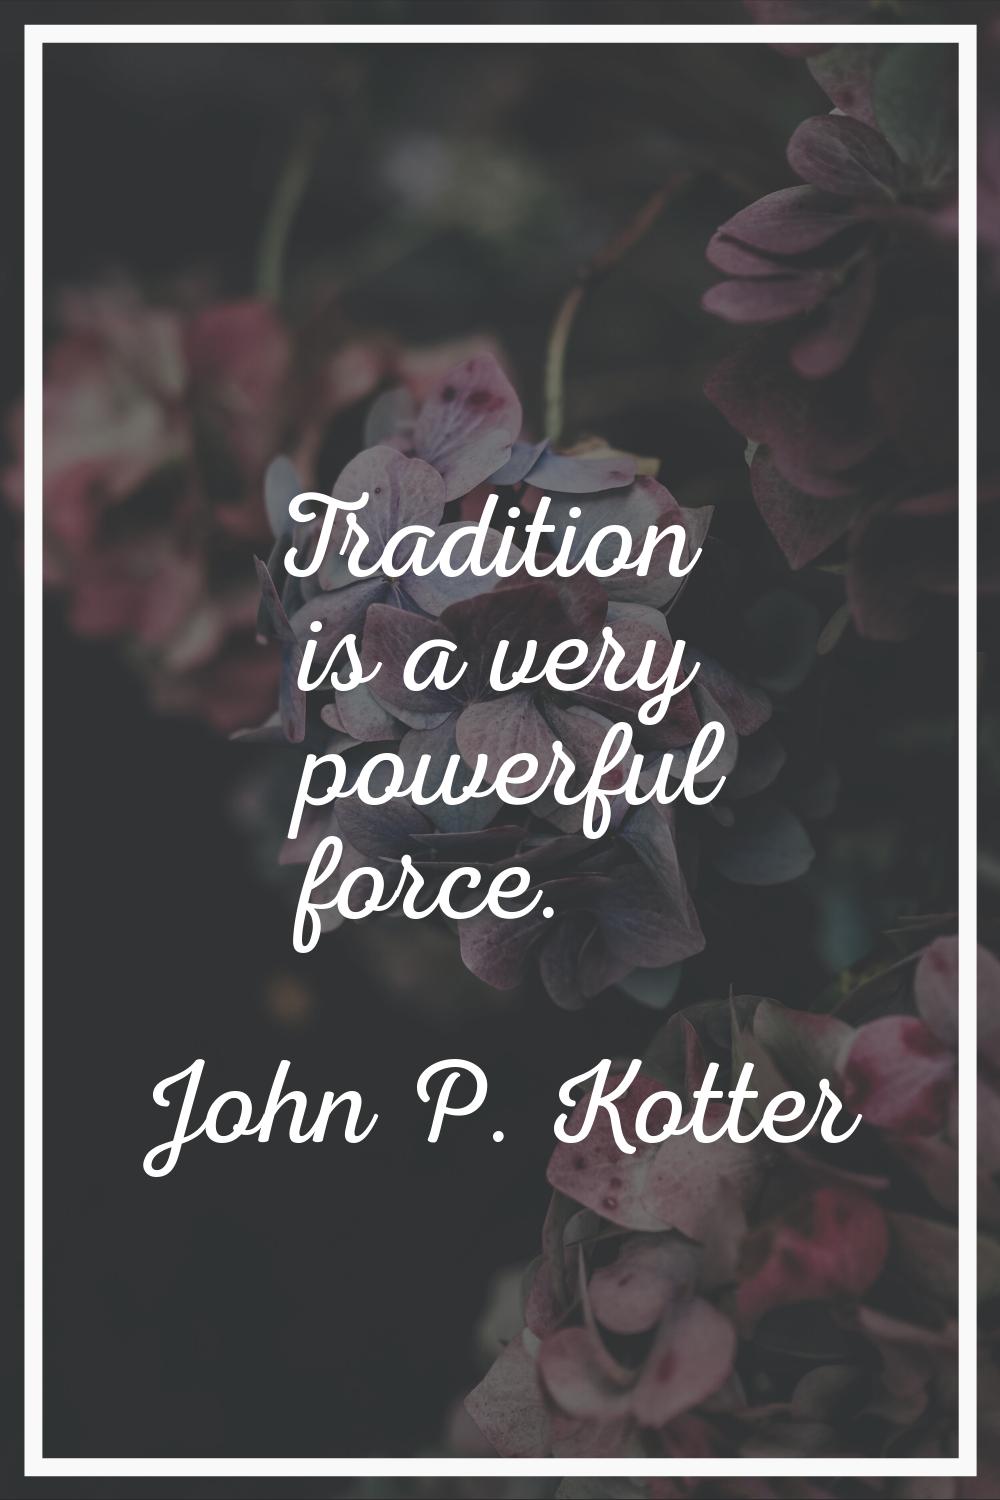 Tradition is a very powerful force.